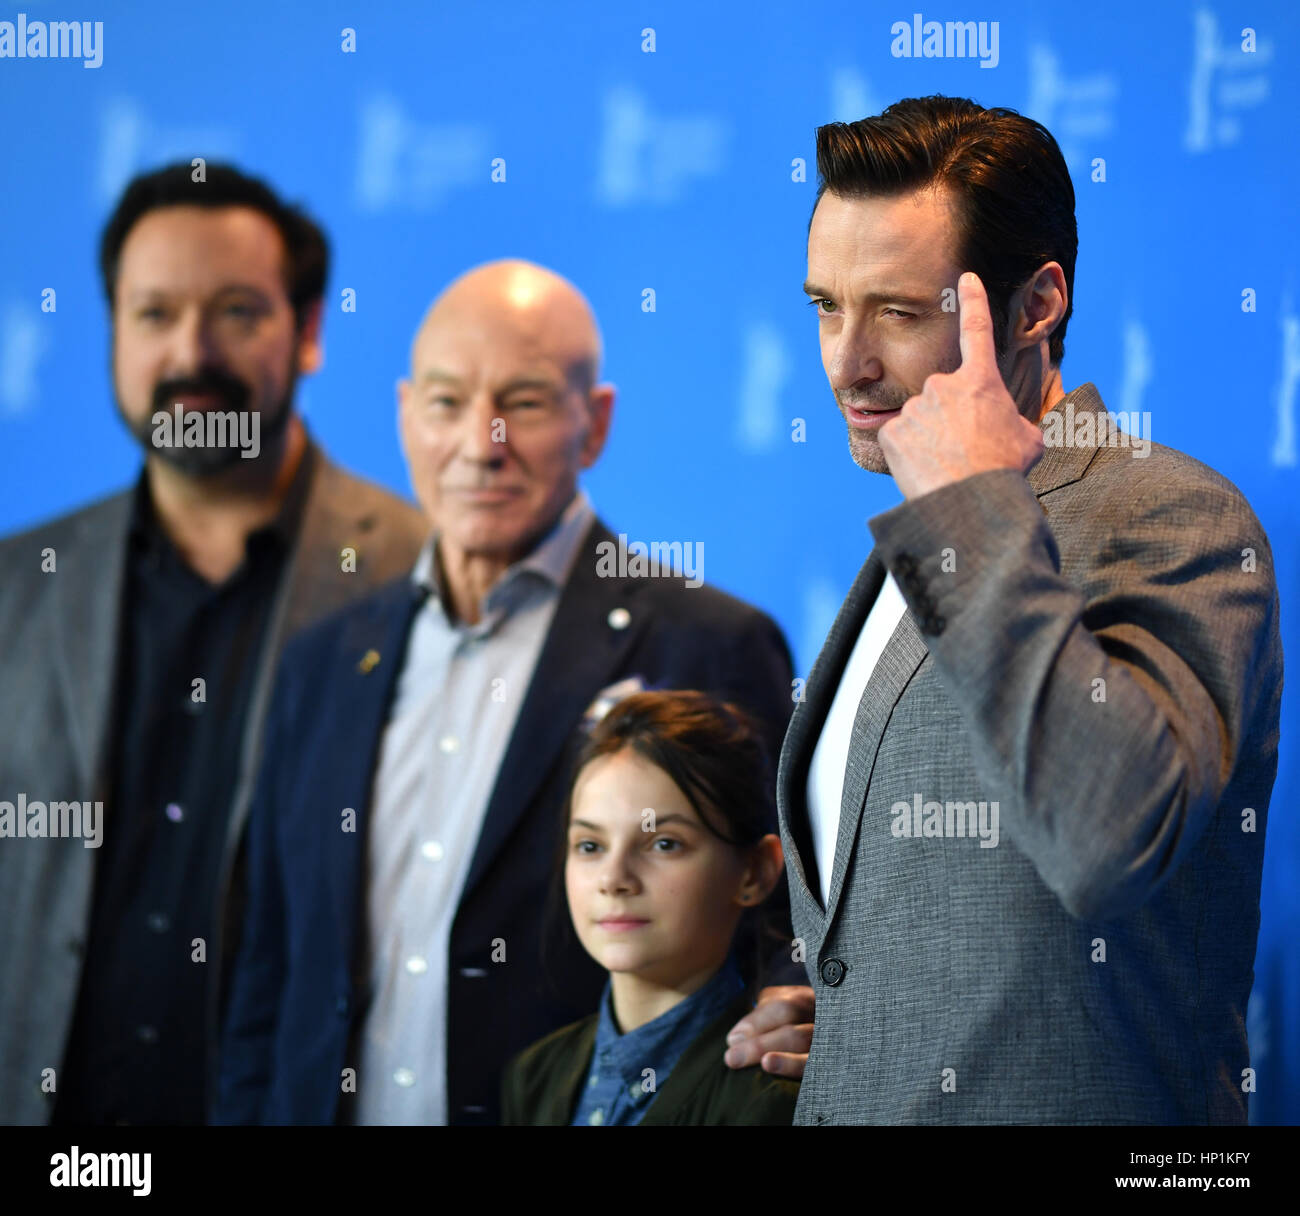 Berlin, Germany. 17th Feb, 2017. Director James Mangold and actors Patrick Stewart, Dafne Keen and Hugh Jackman pose during a photo call for the movie 'Logan' at the 67th International Berlin Film Festival in Berlin, Germany, 17 February 2017. The US-American movie runs noncompetitively. Photo: Jens Kalaene/dpa-Zentralbild/dpa/Alamy Live News Stock Photo